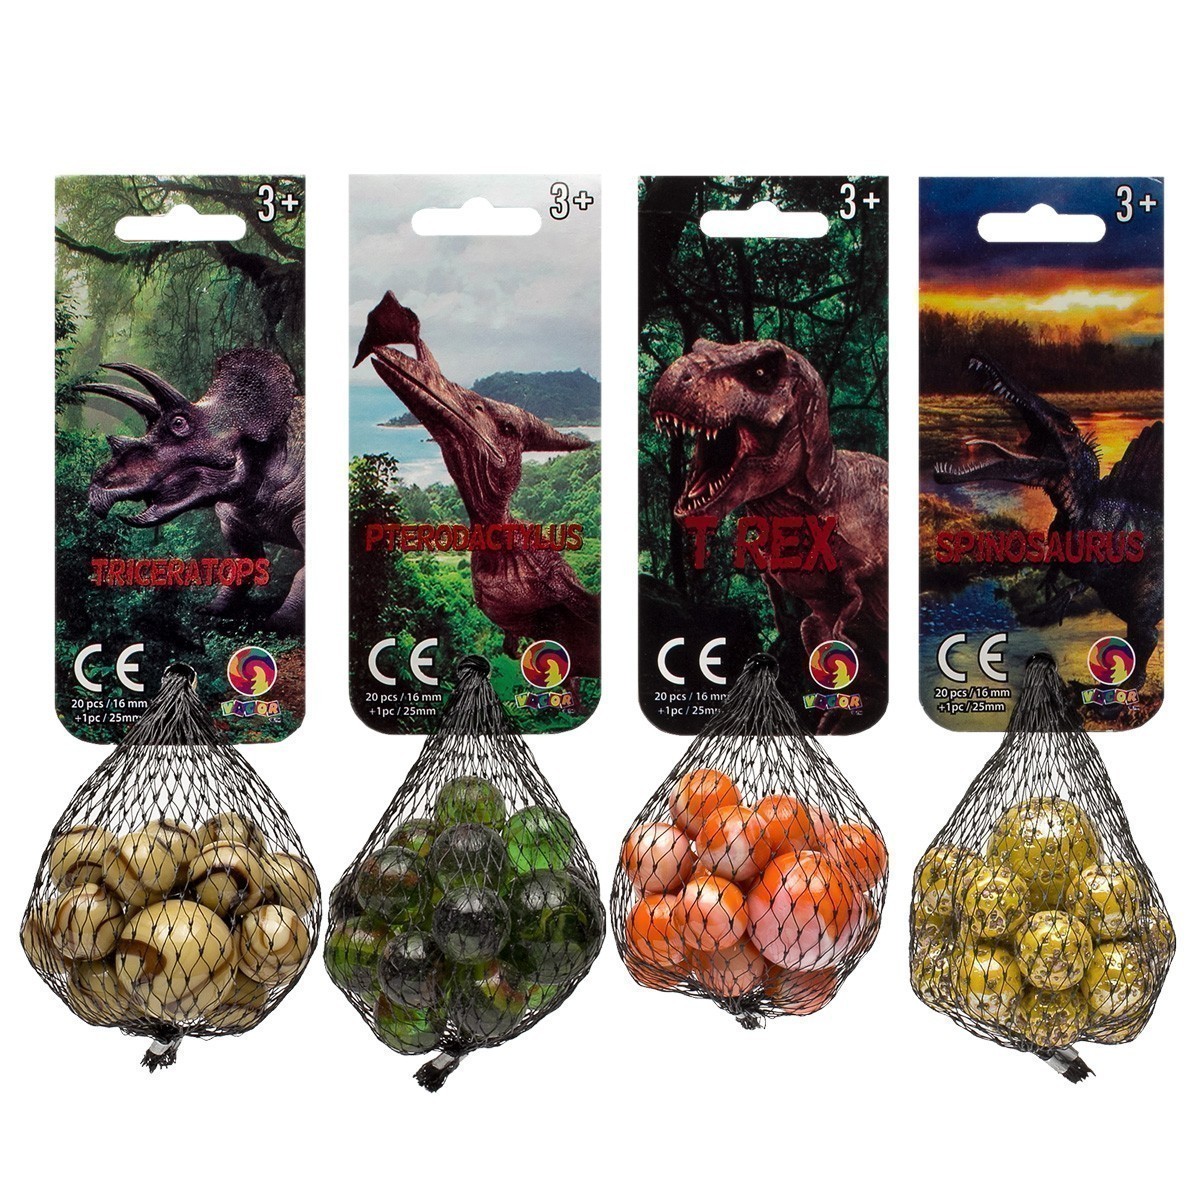 Vacor 16mm Glass Marbles - Dinosaurs Collection